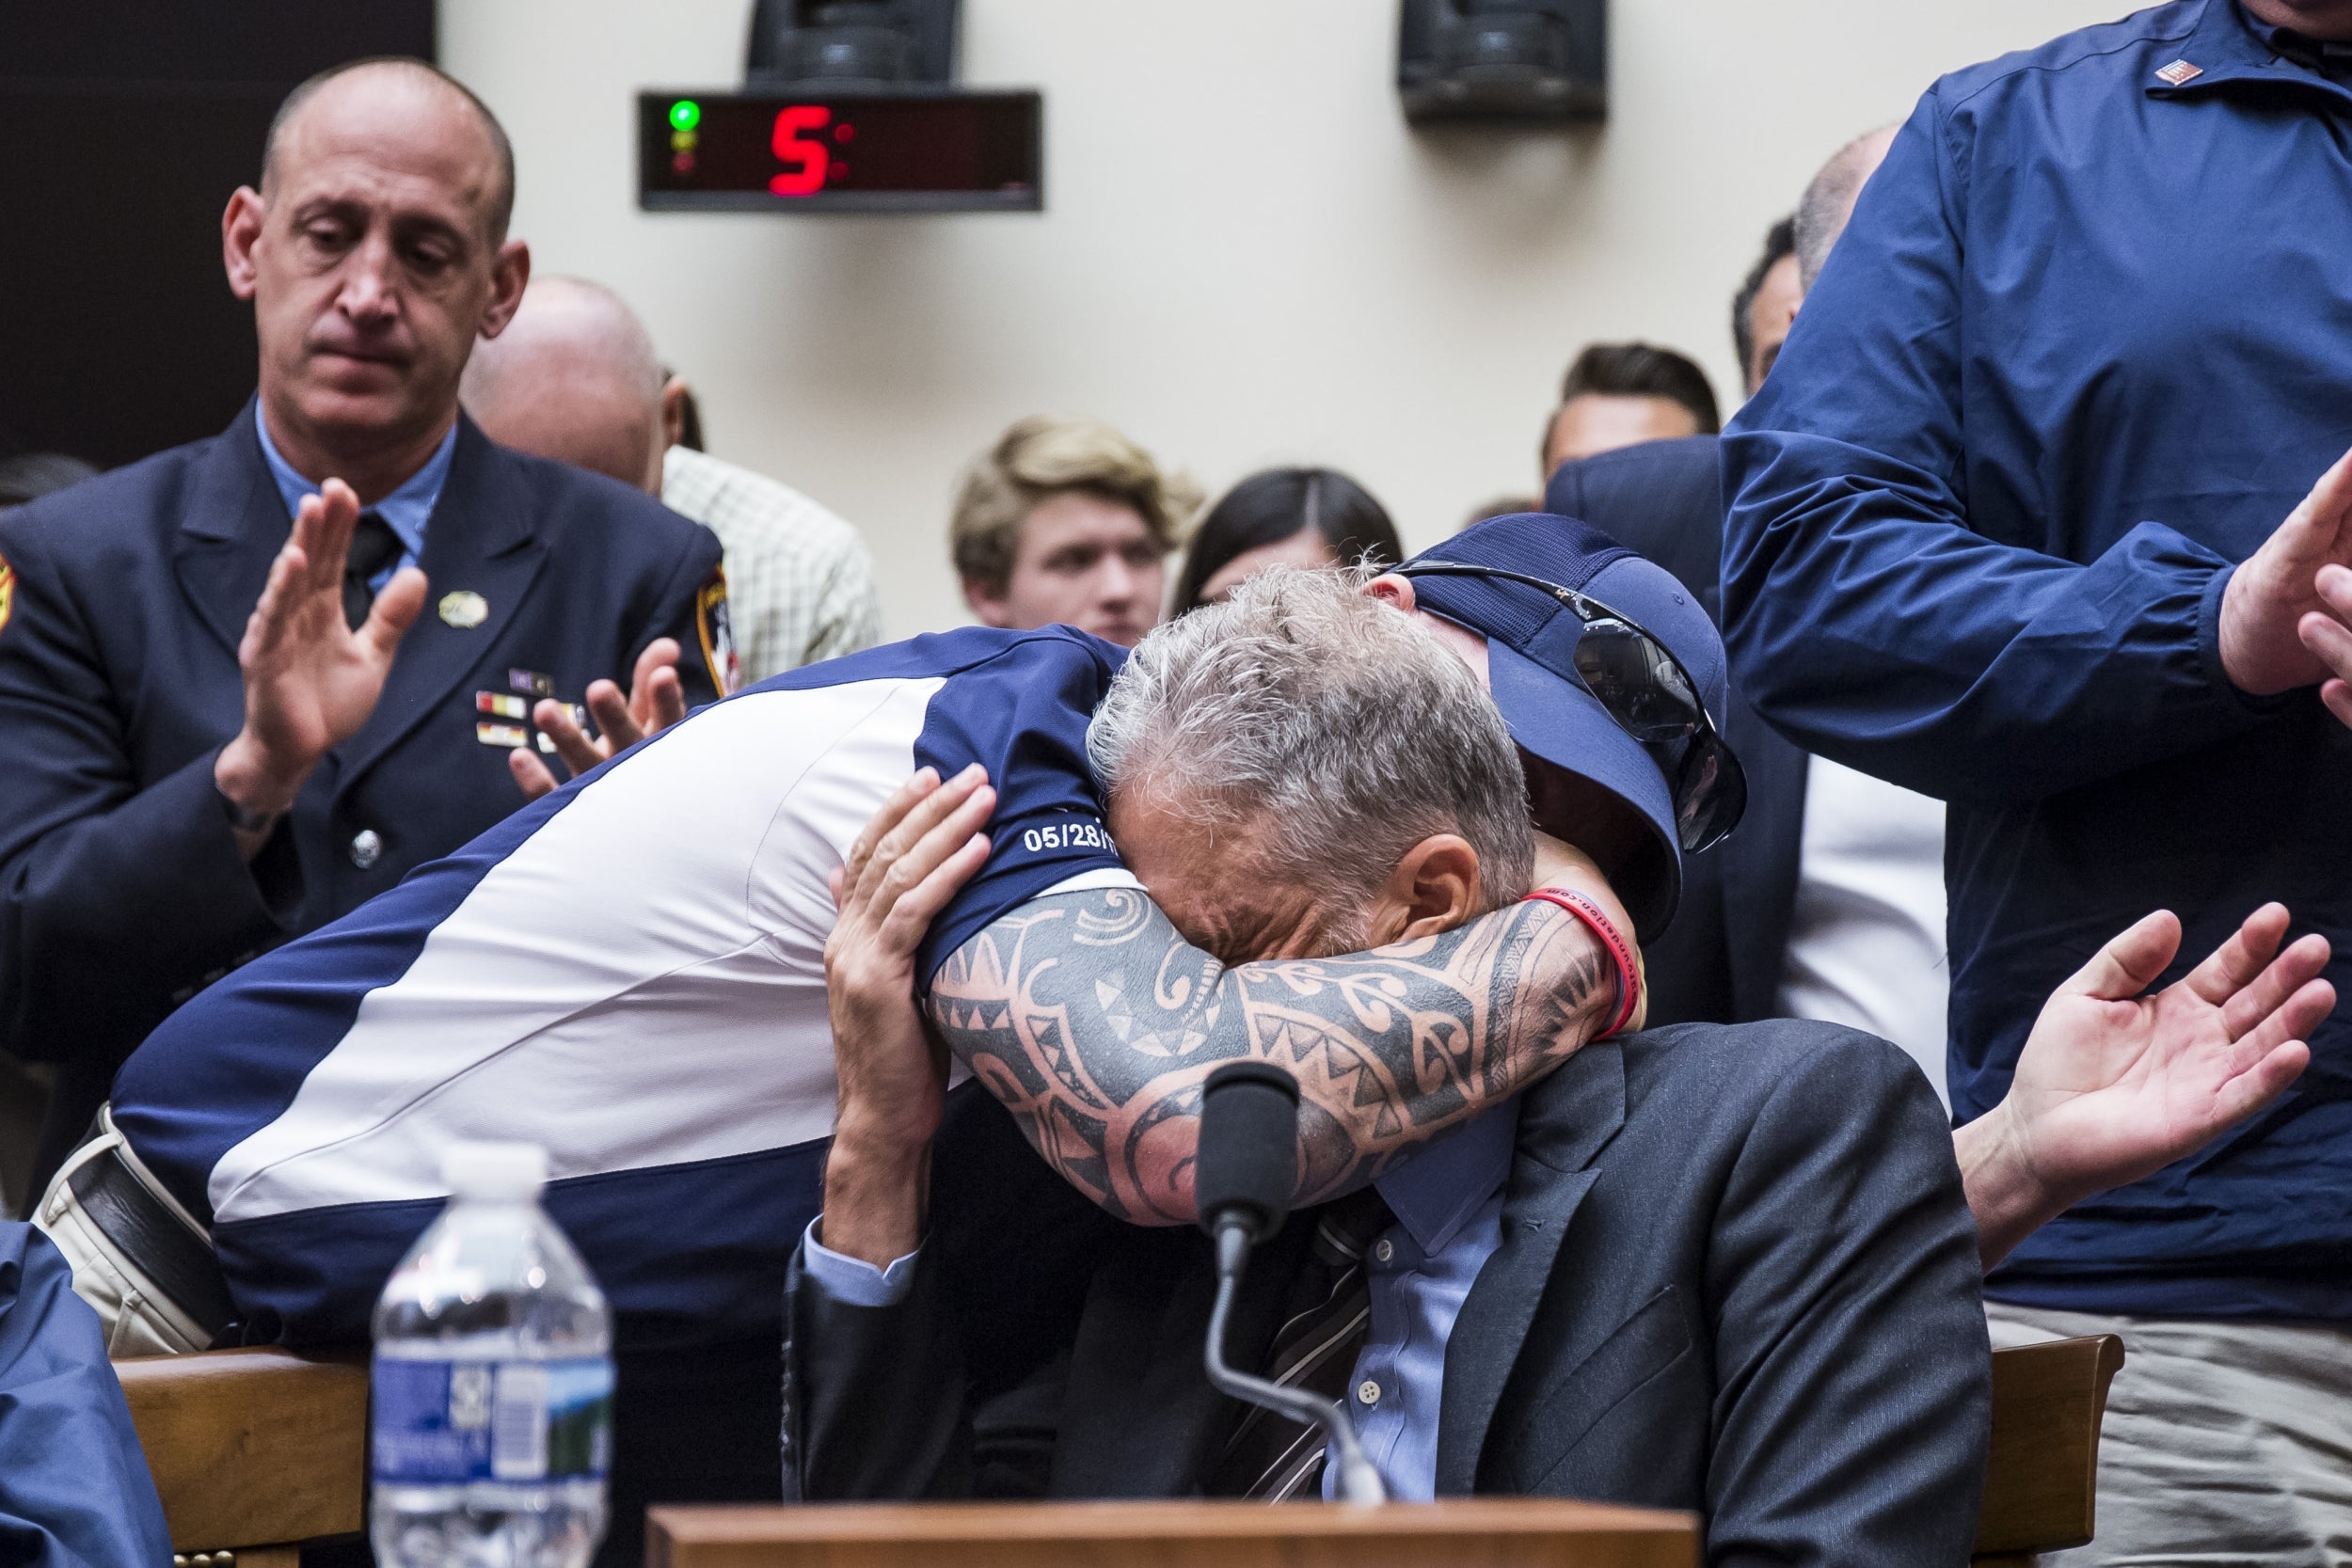 John Feal hugs John Stewart in 2011 as they successfully lobby Congress to provide compensation to 9/11 first responders